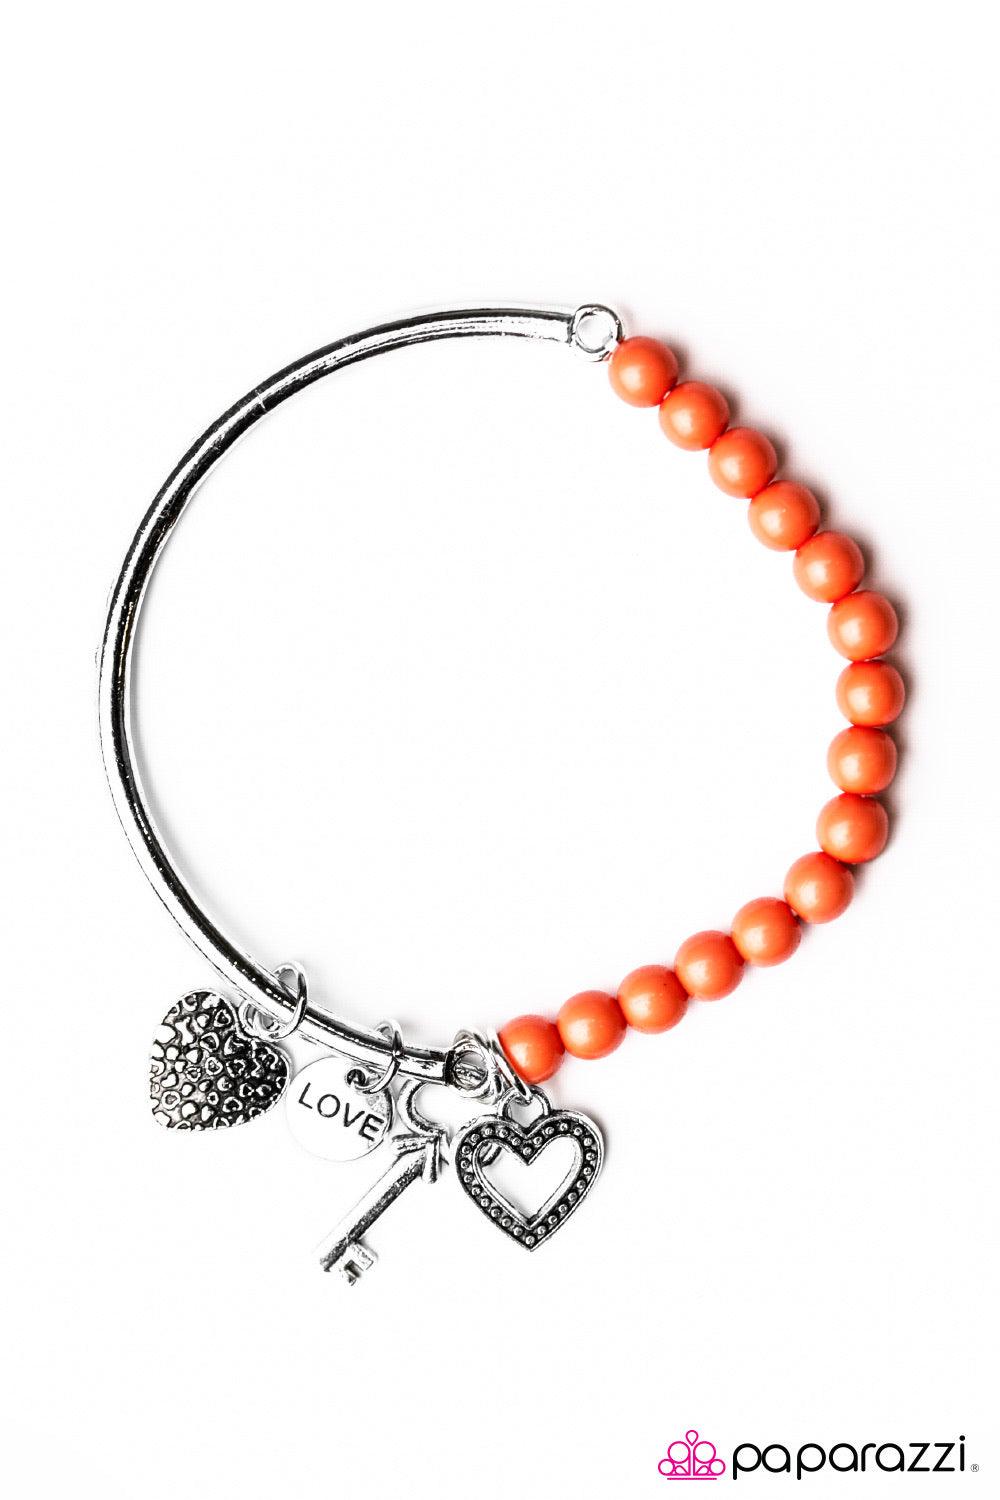 Paparazzi Accessories You Hold The Key ~Orange Threaded through an elastic stretchy band, orange beading connects to a silver bar around the wrist. Brushed in an antiqued shimmer, silver hearts, a key, and charm engraved in the word “love” slides along th